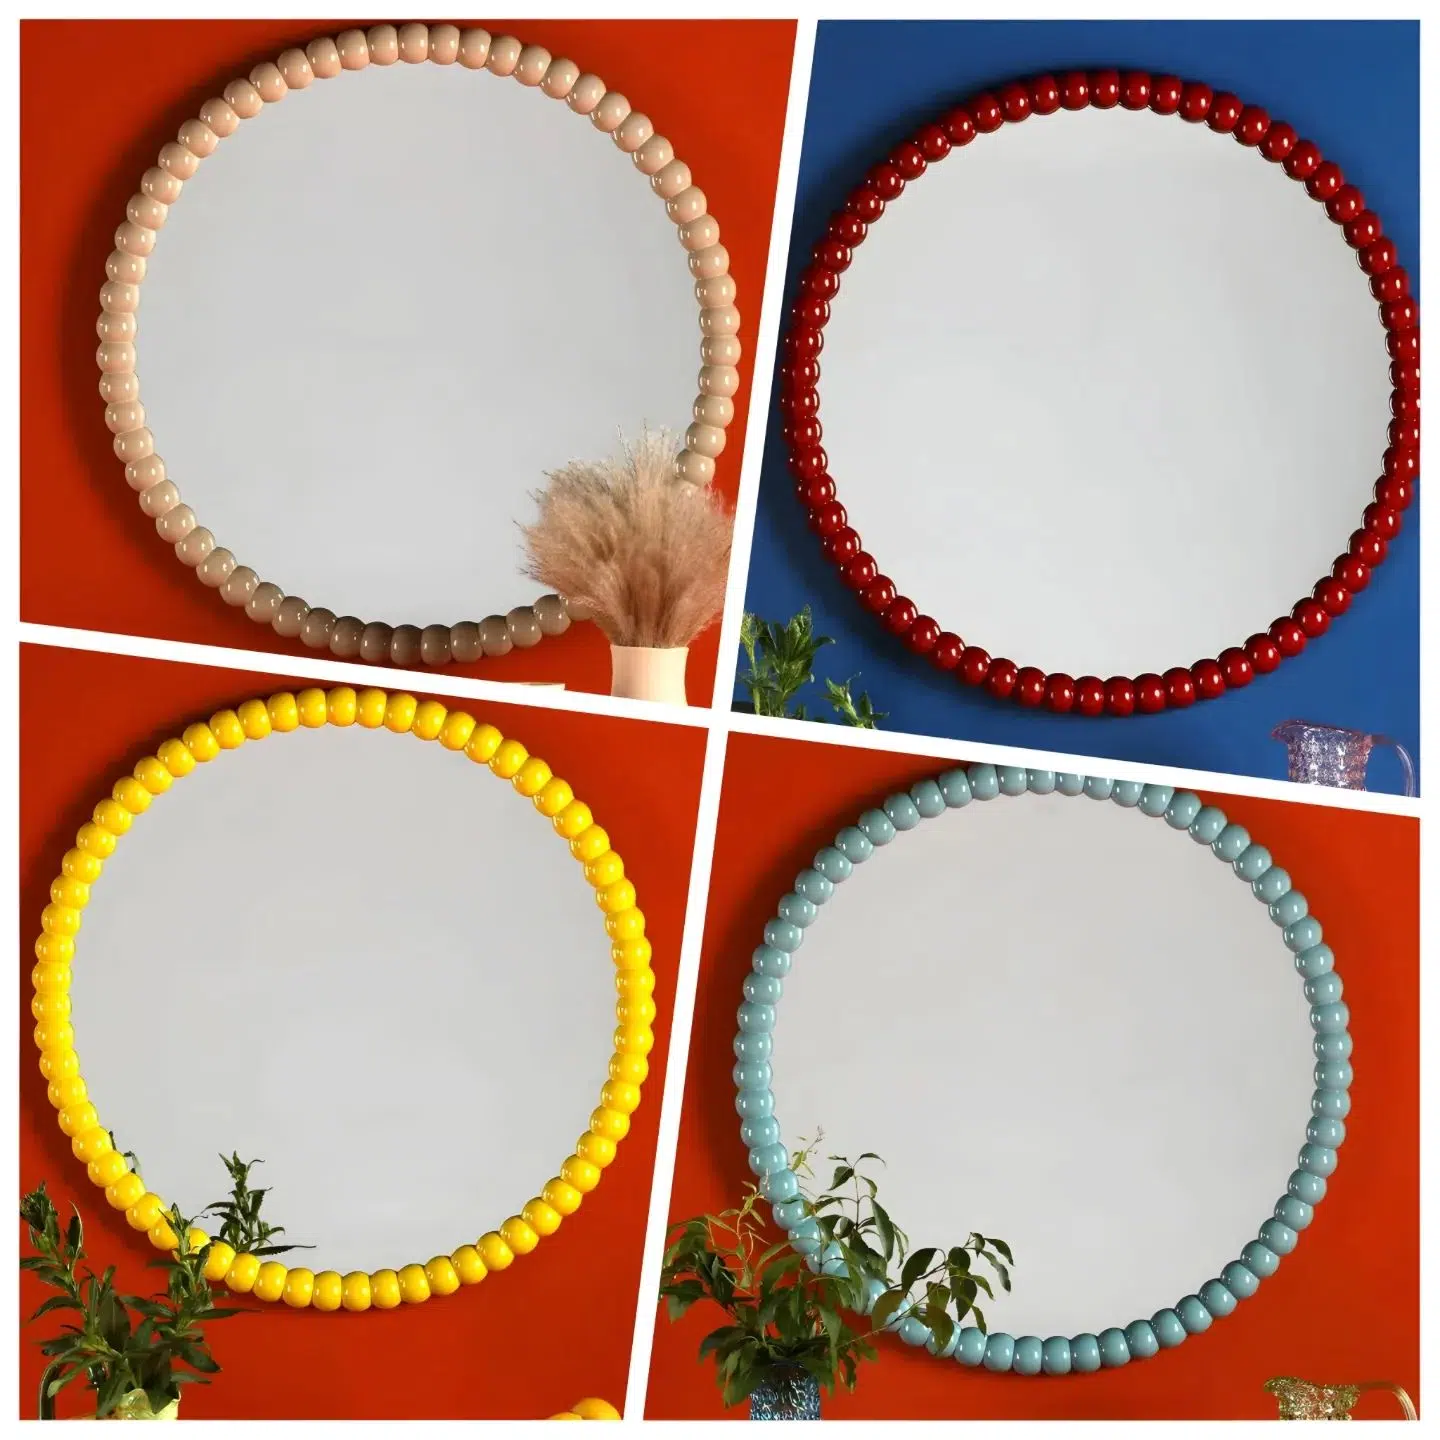 The bobbin round mirror offers a contemporary twist on a traditional design. The bobbin mirror features a wooden bobbin on top of the mirror, which adds a fun and quirky touch. The natural wood finish complements any decor, from modern to traditional. Available in gloss beige, yellow, red, blue or green at stillorgandecor.ie for delivery nationwide. 🪞

Search 'bobbin mirror' at stillorgandecor.ie for more details.